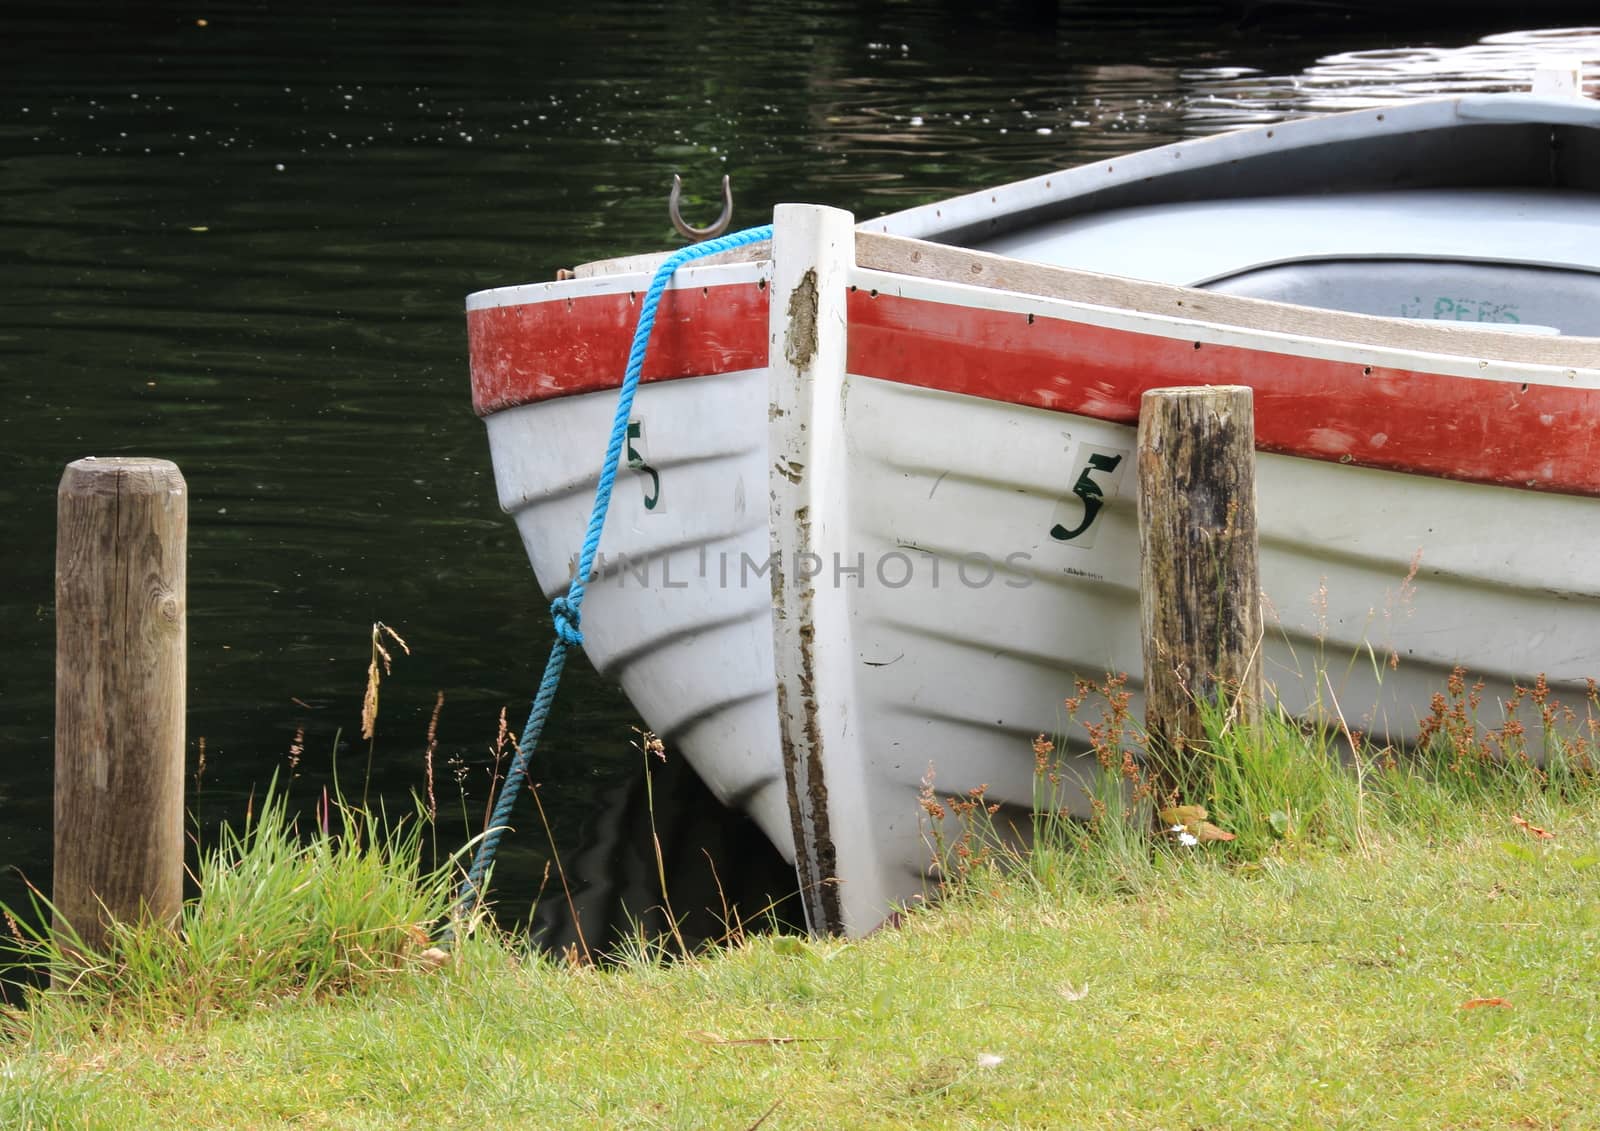 Rowing boat in water at grass field